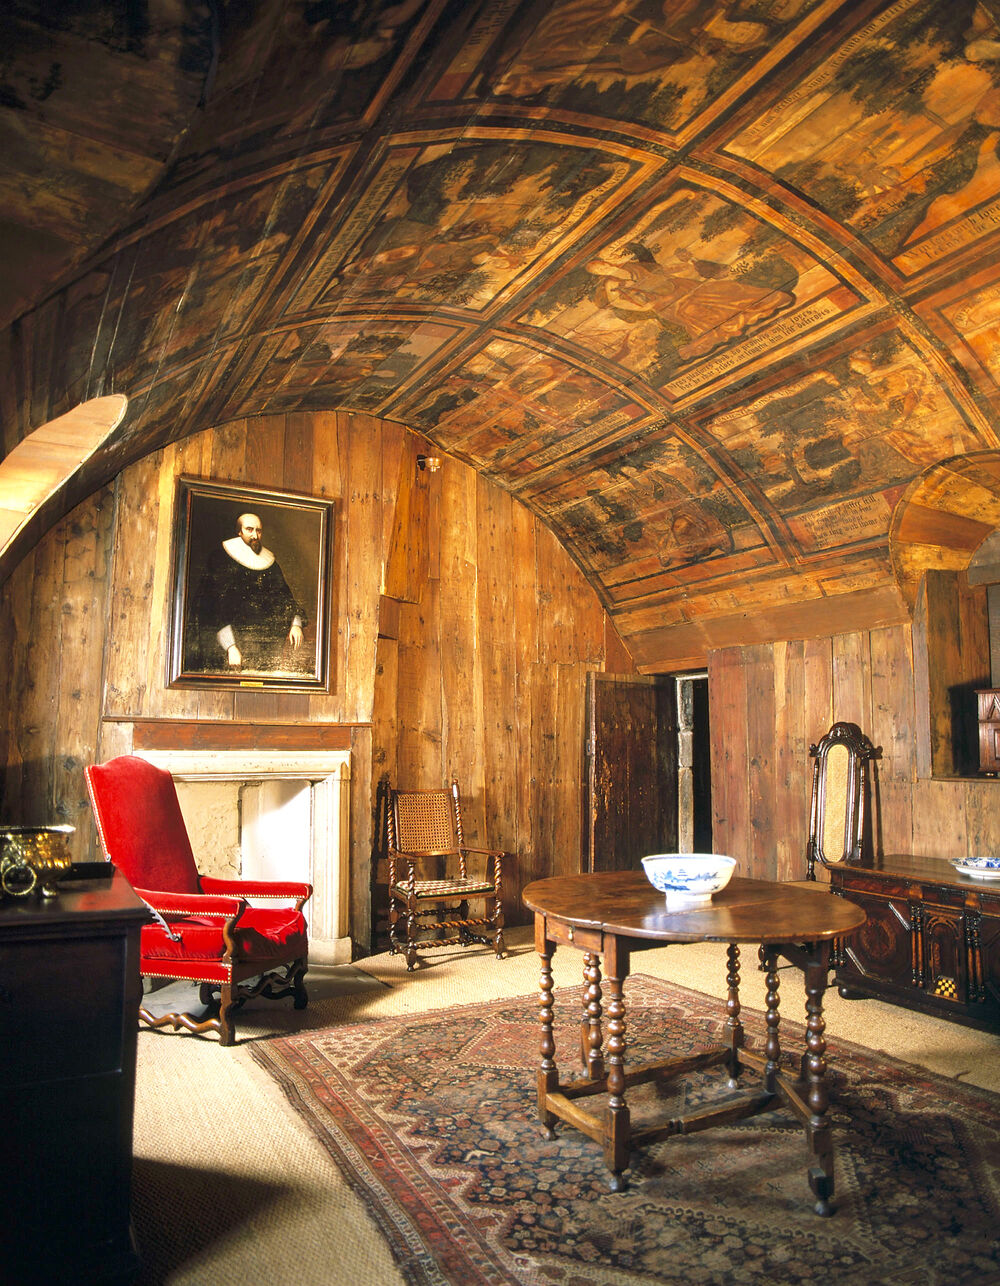 A room with a barrel ceiling and wood-panelled walls. The ceiling is covered in painted panels. A red armchair stands at the far end of the room. A wooden table stands in the centre of the room on a Turkish rug.